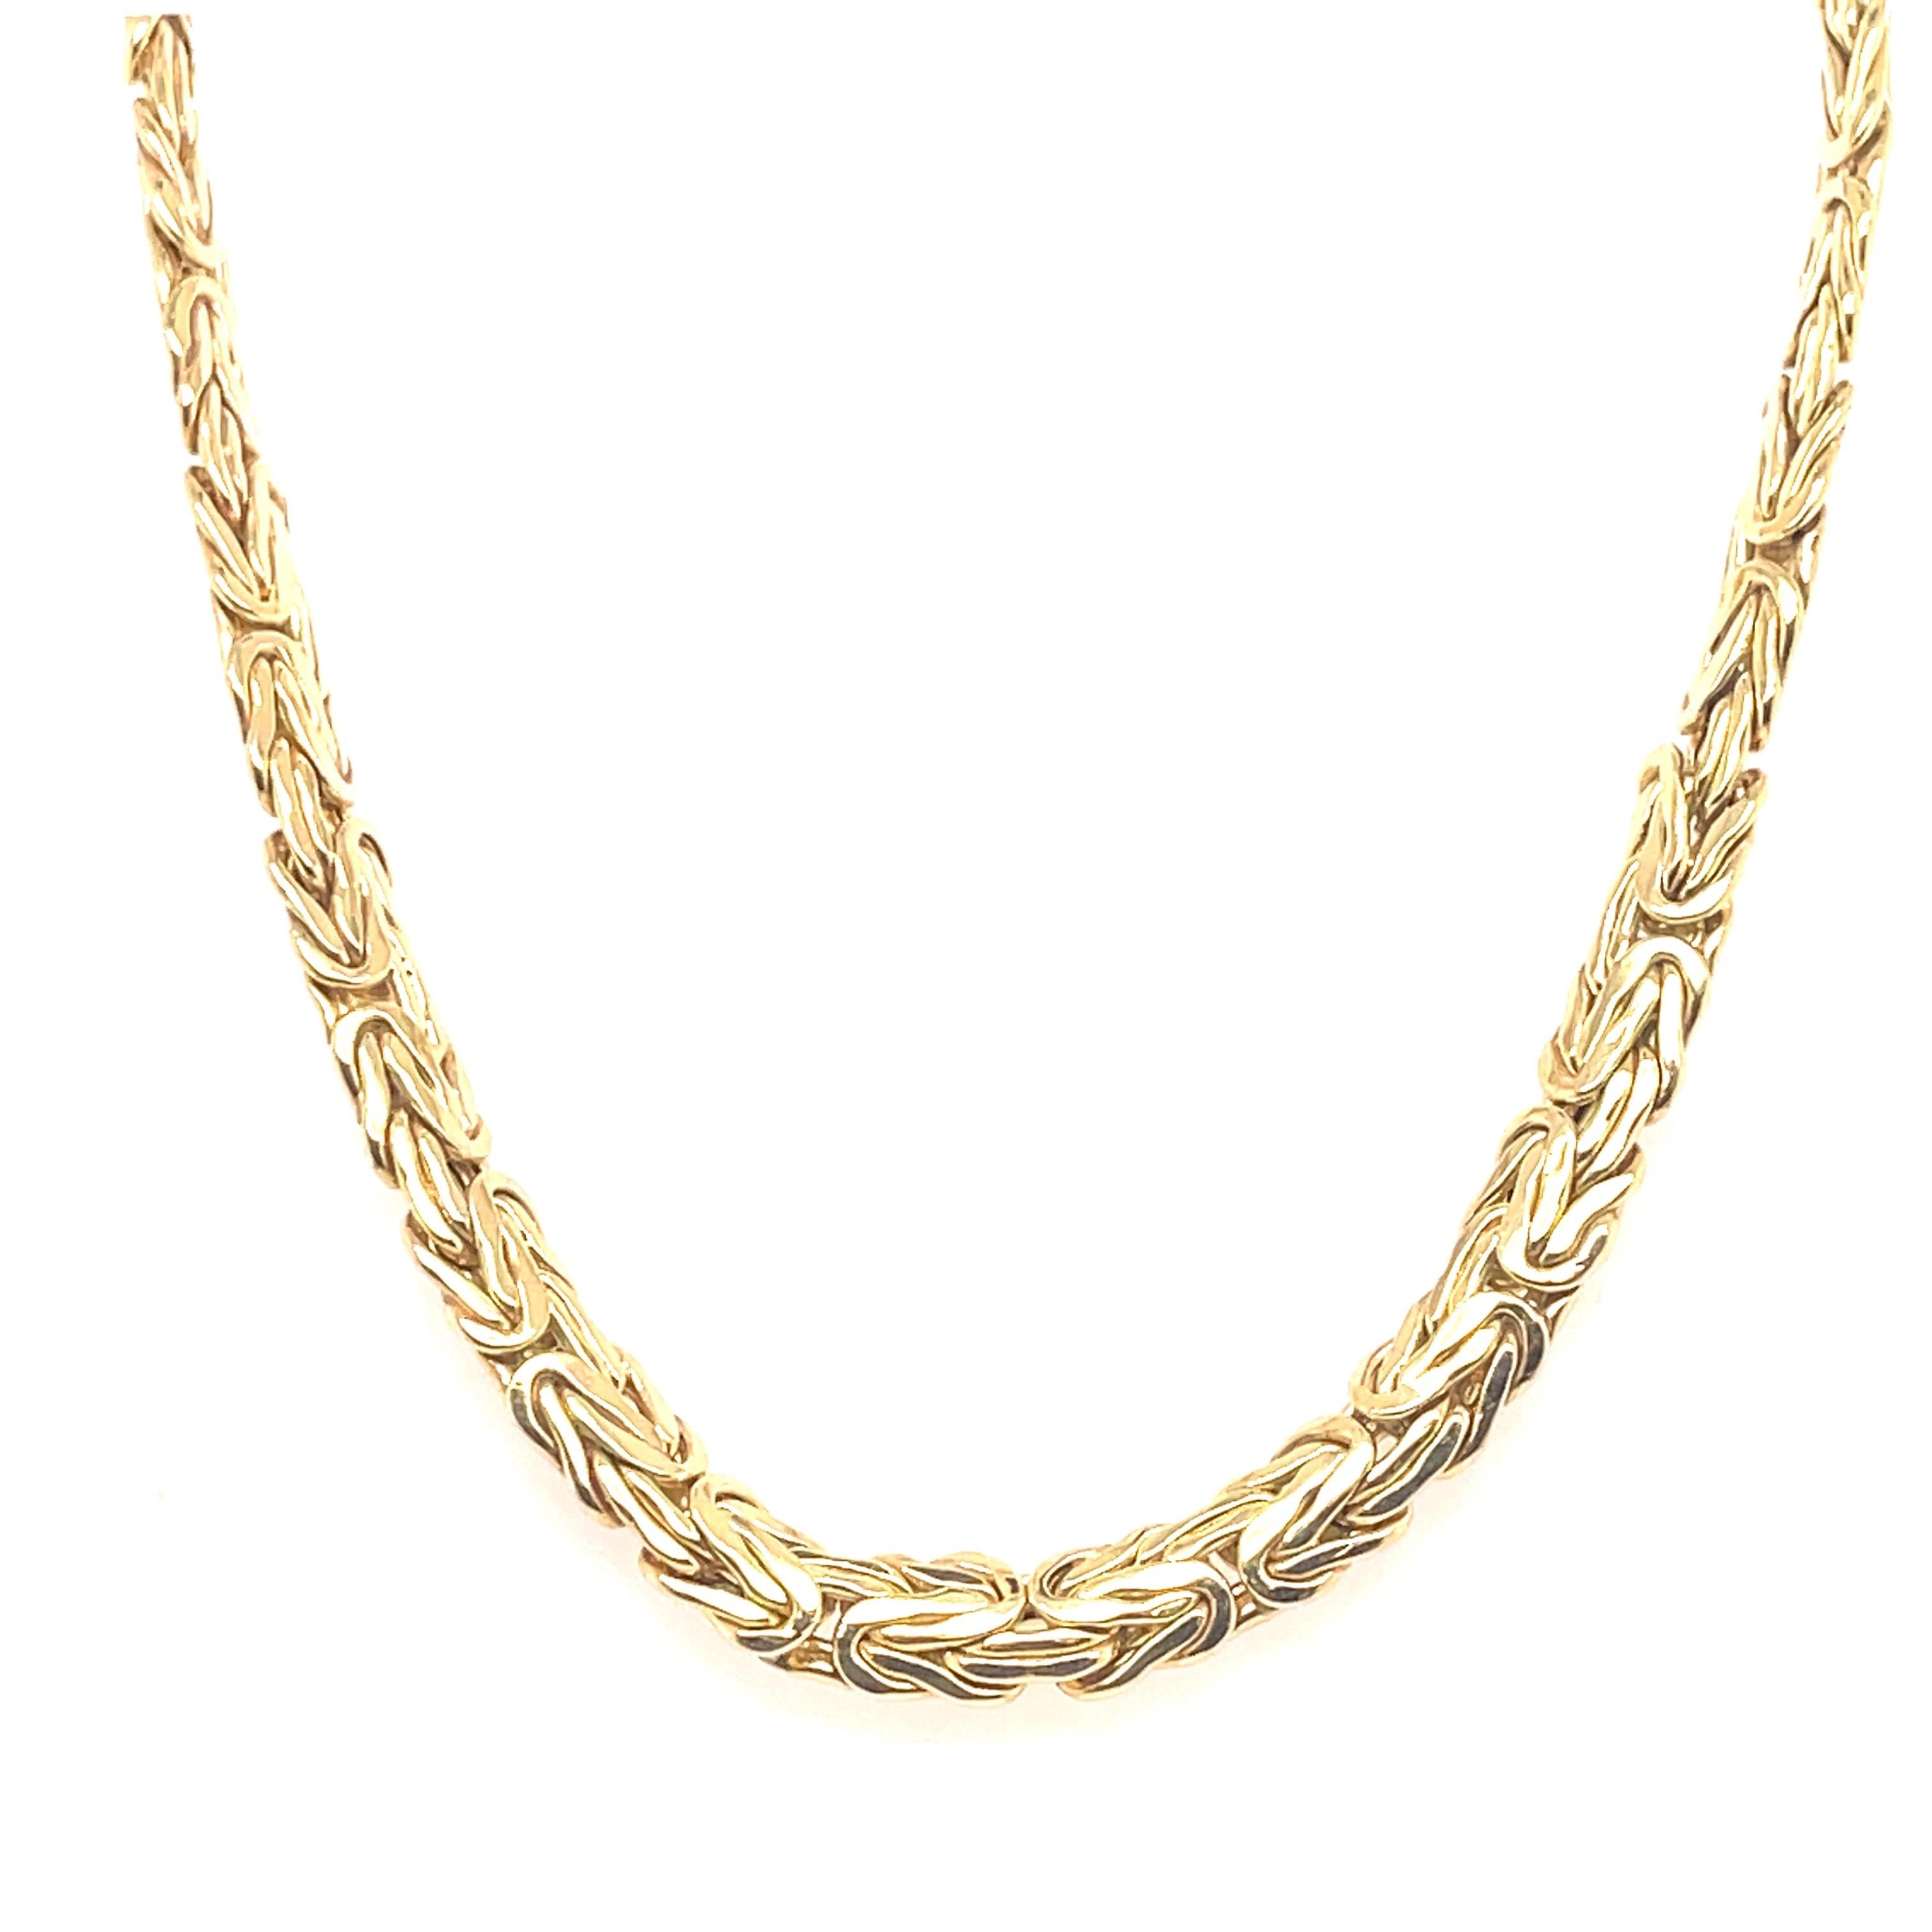 Interlocking Chain Gold Necklace 29 Inches 14 Karat Yellow Gold 54 Grams For Sale